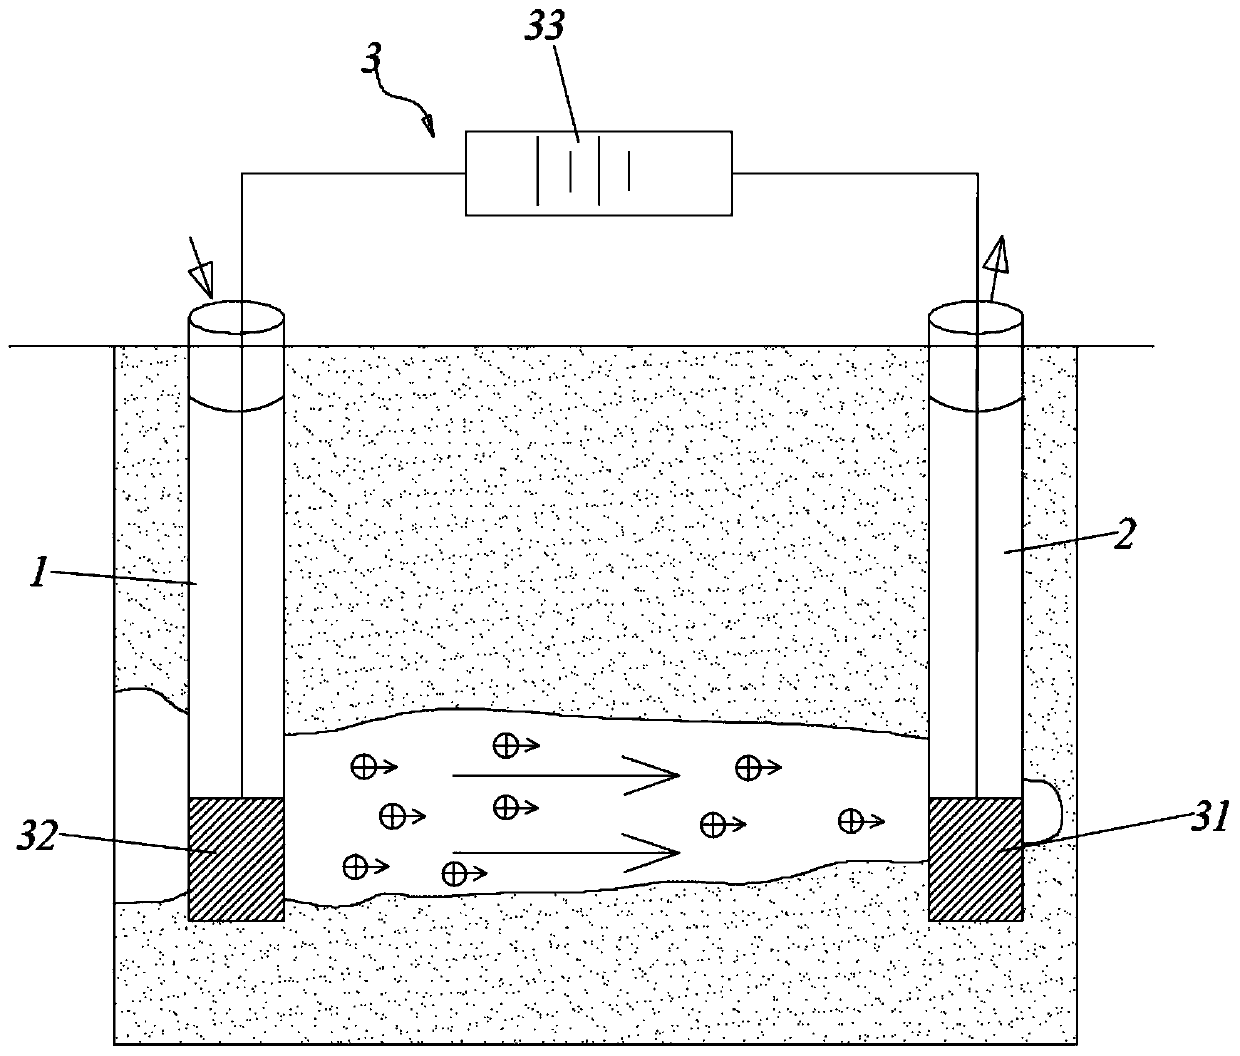 Soil remediation system based on electric auxiliary permeation technology